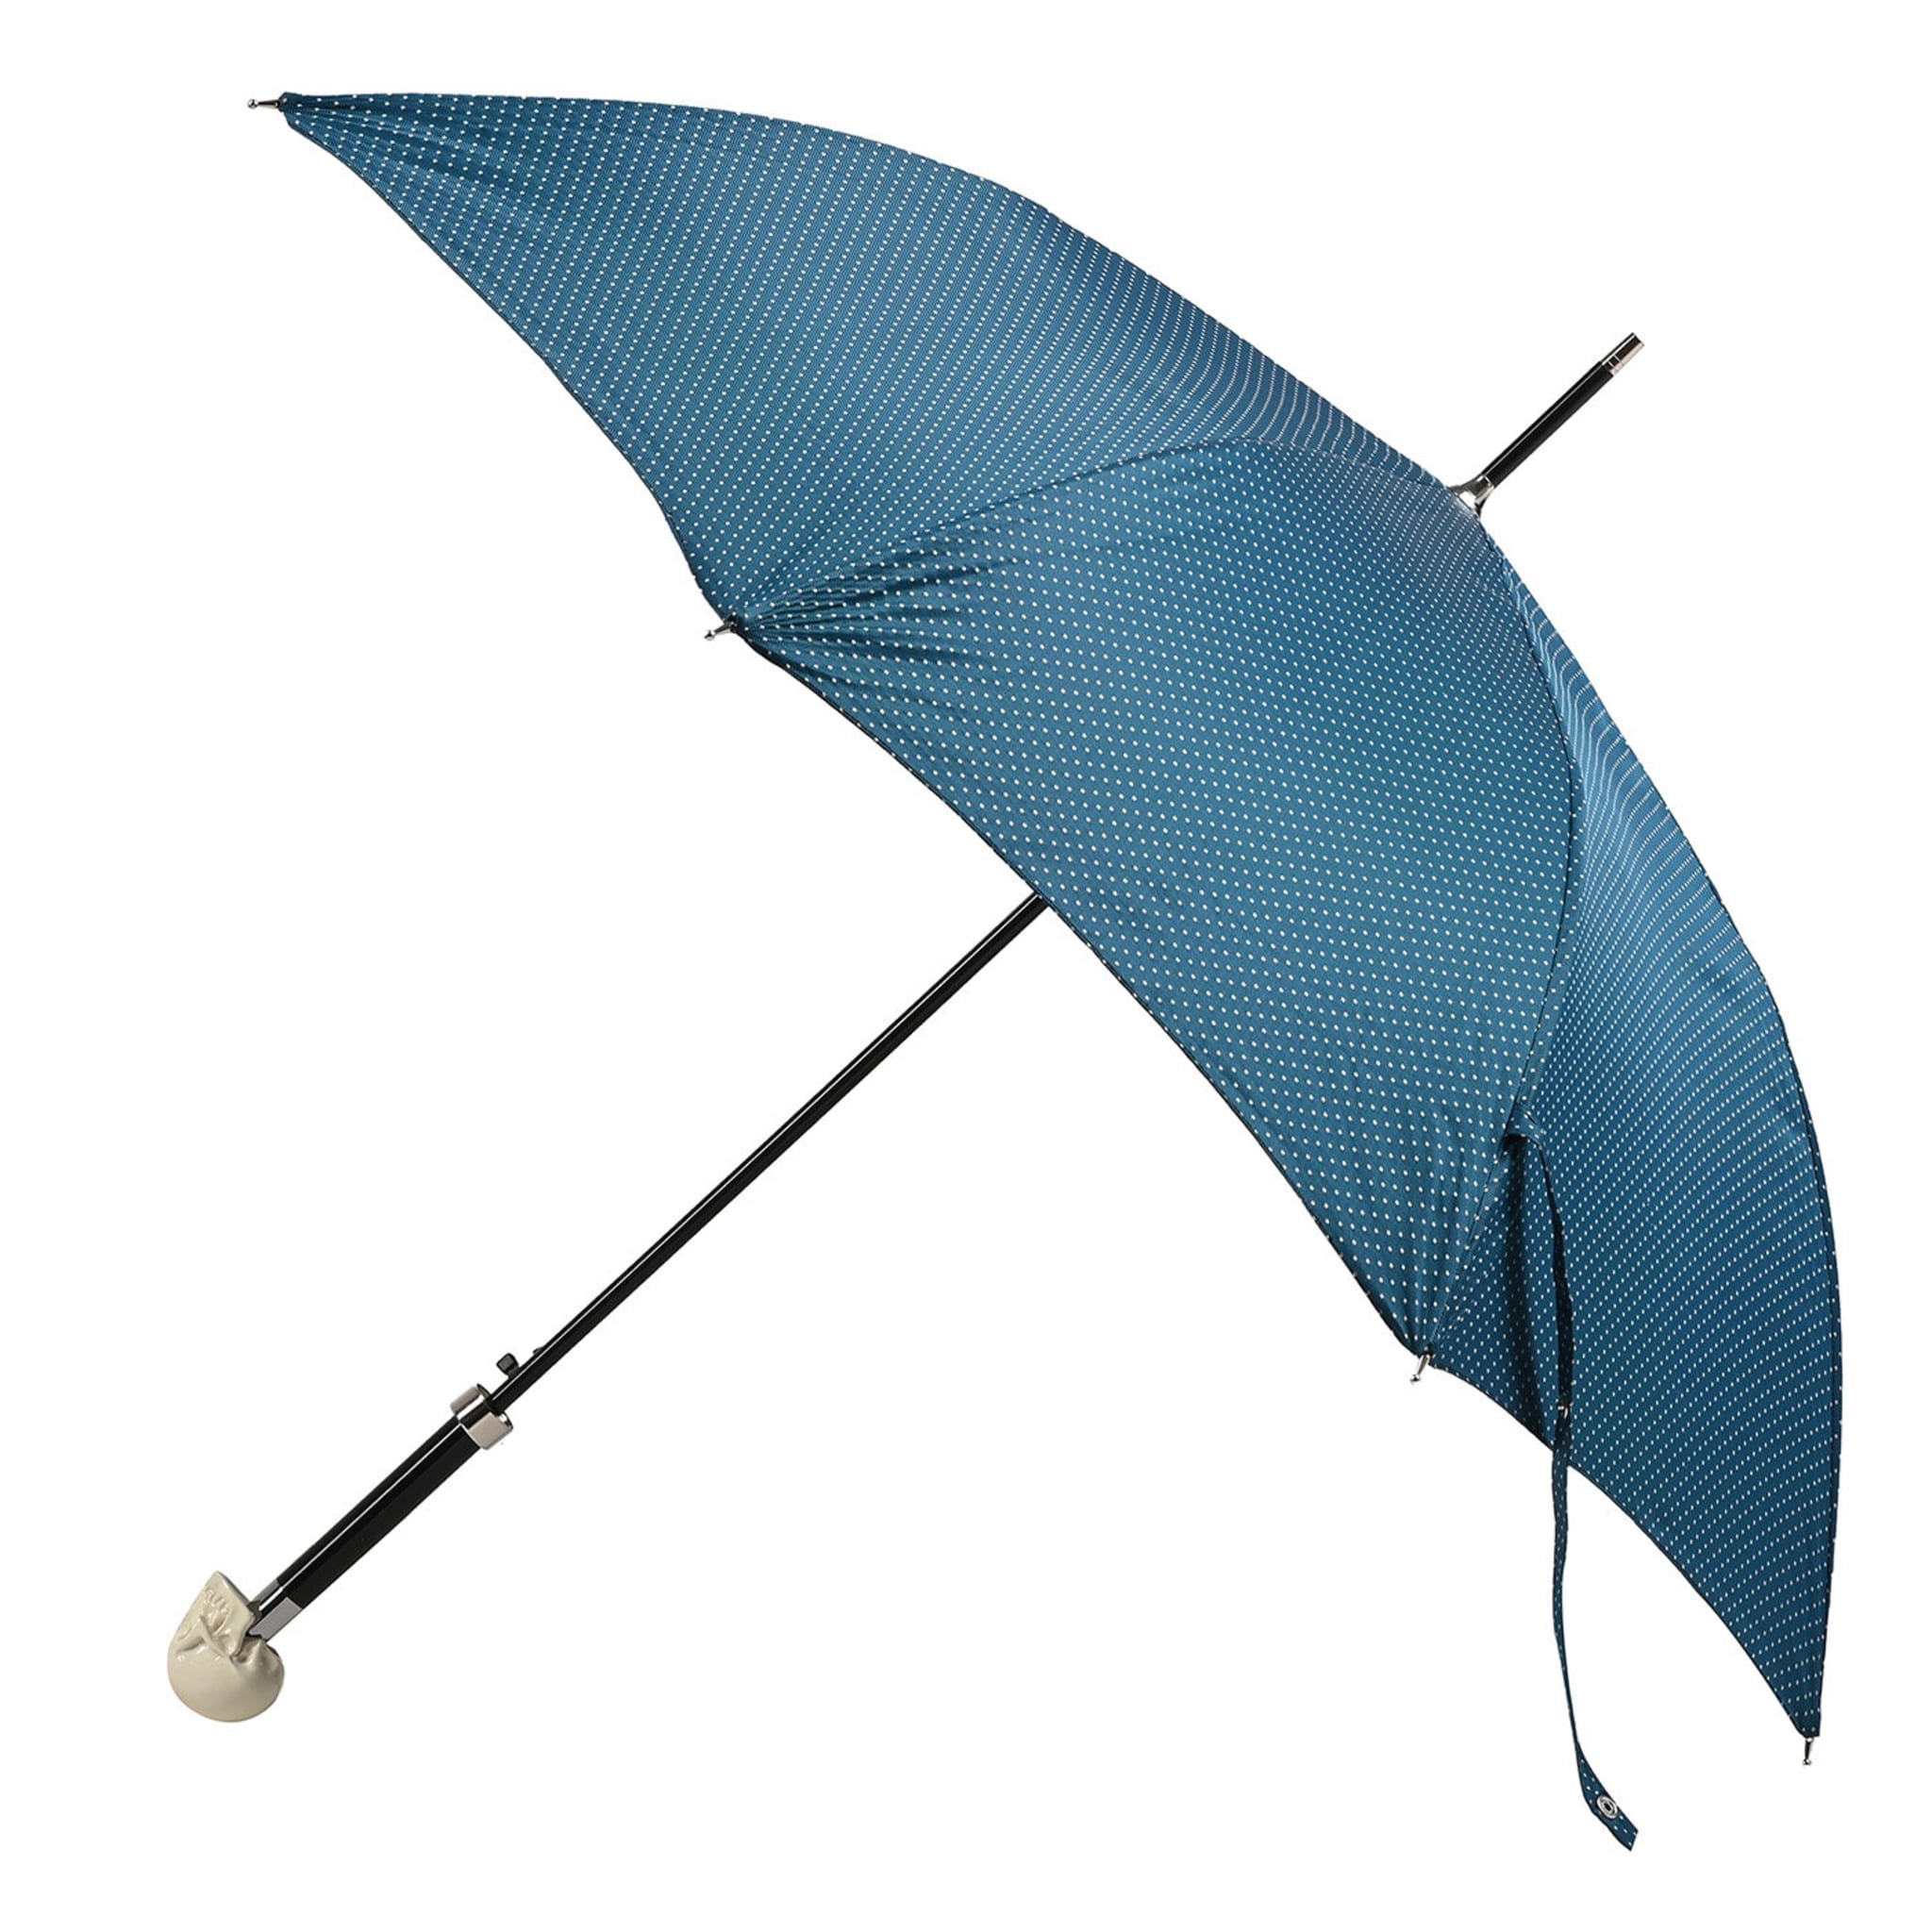 Teal and White Polka Dots Umbrella with Fluorescent Skull Handle - Main view